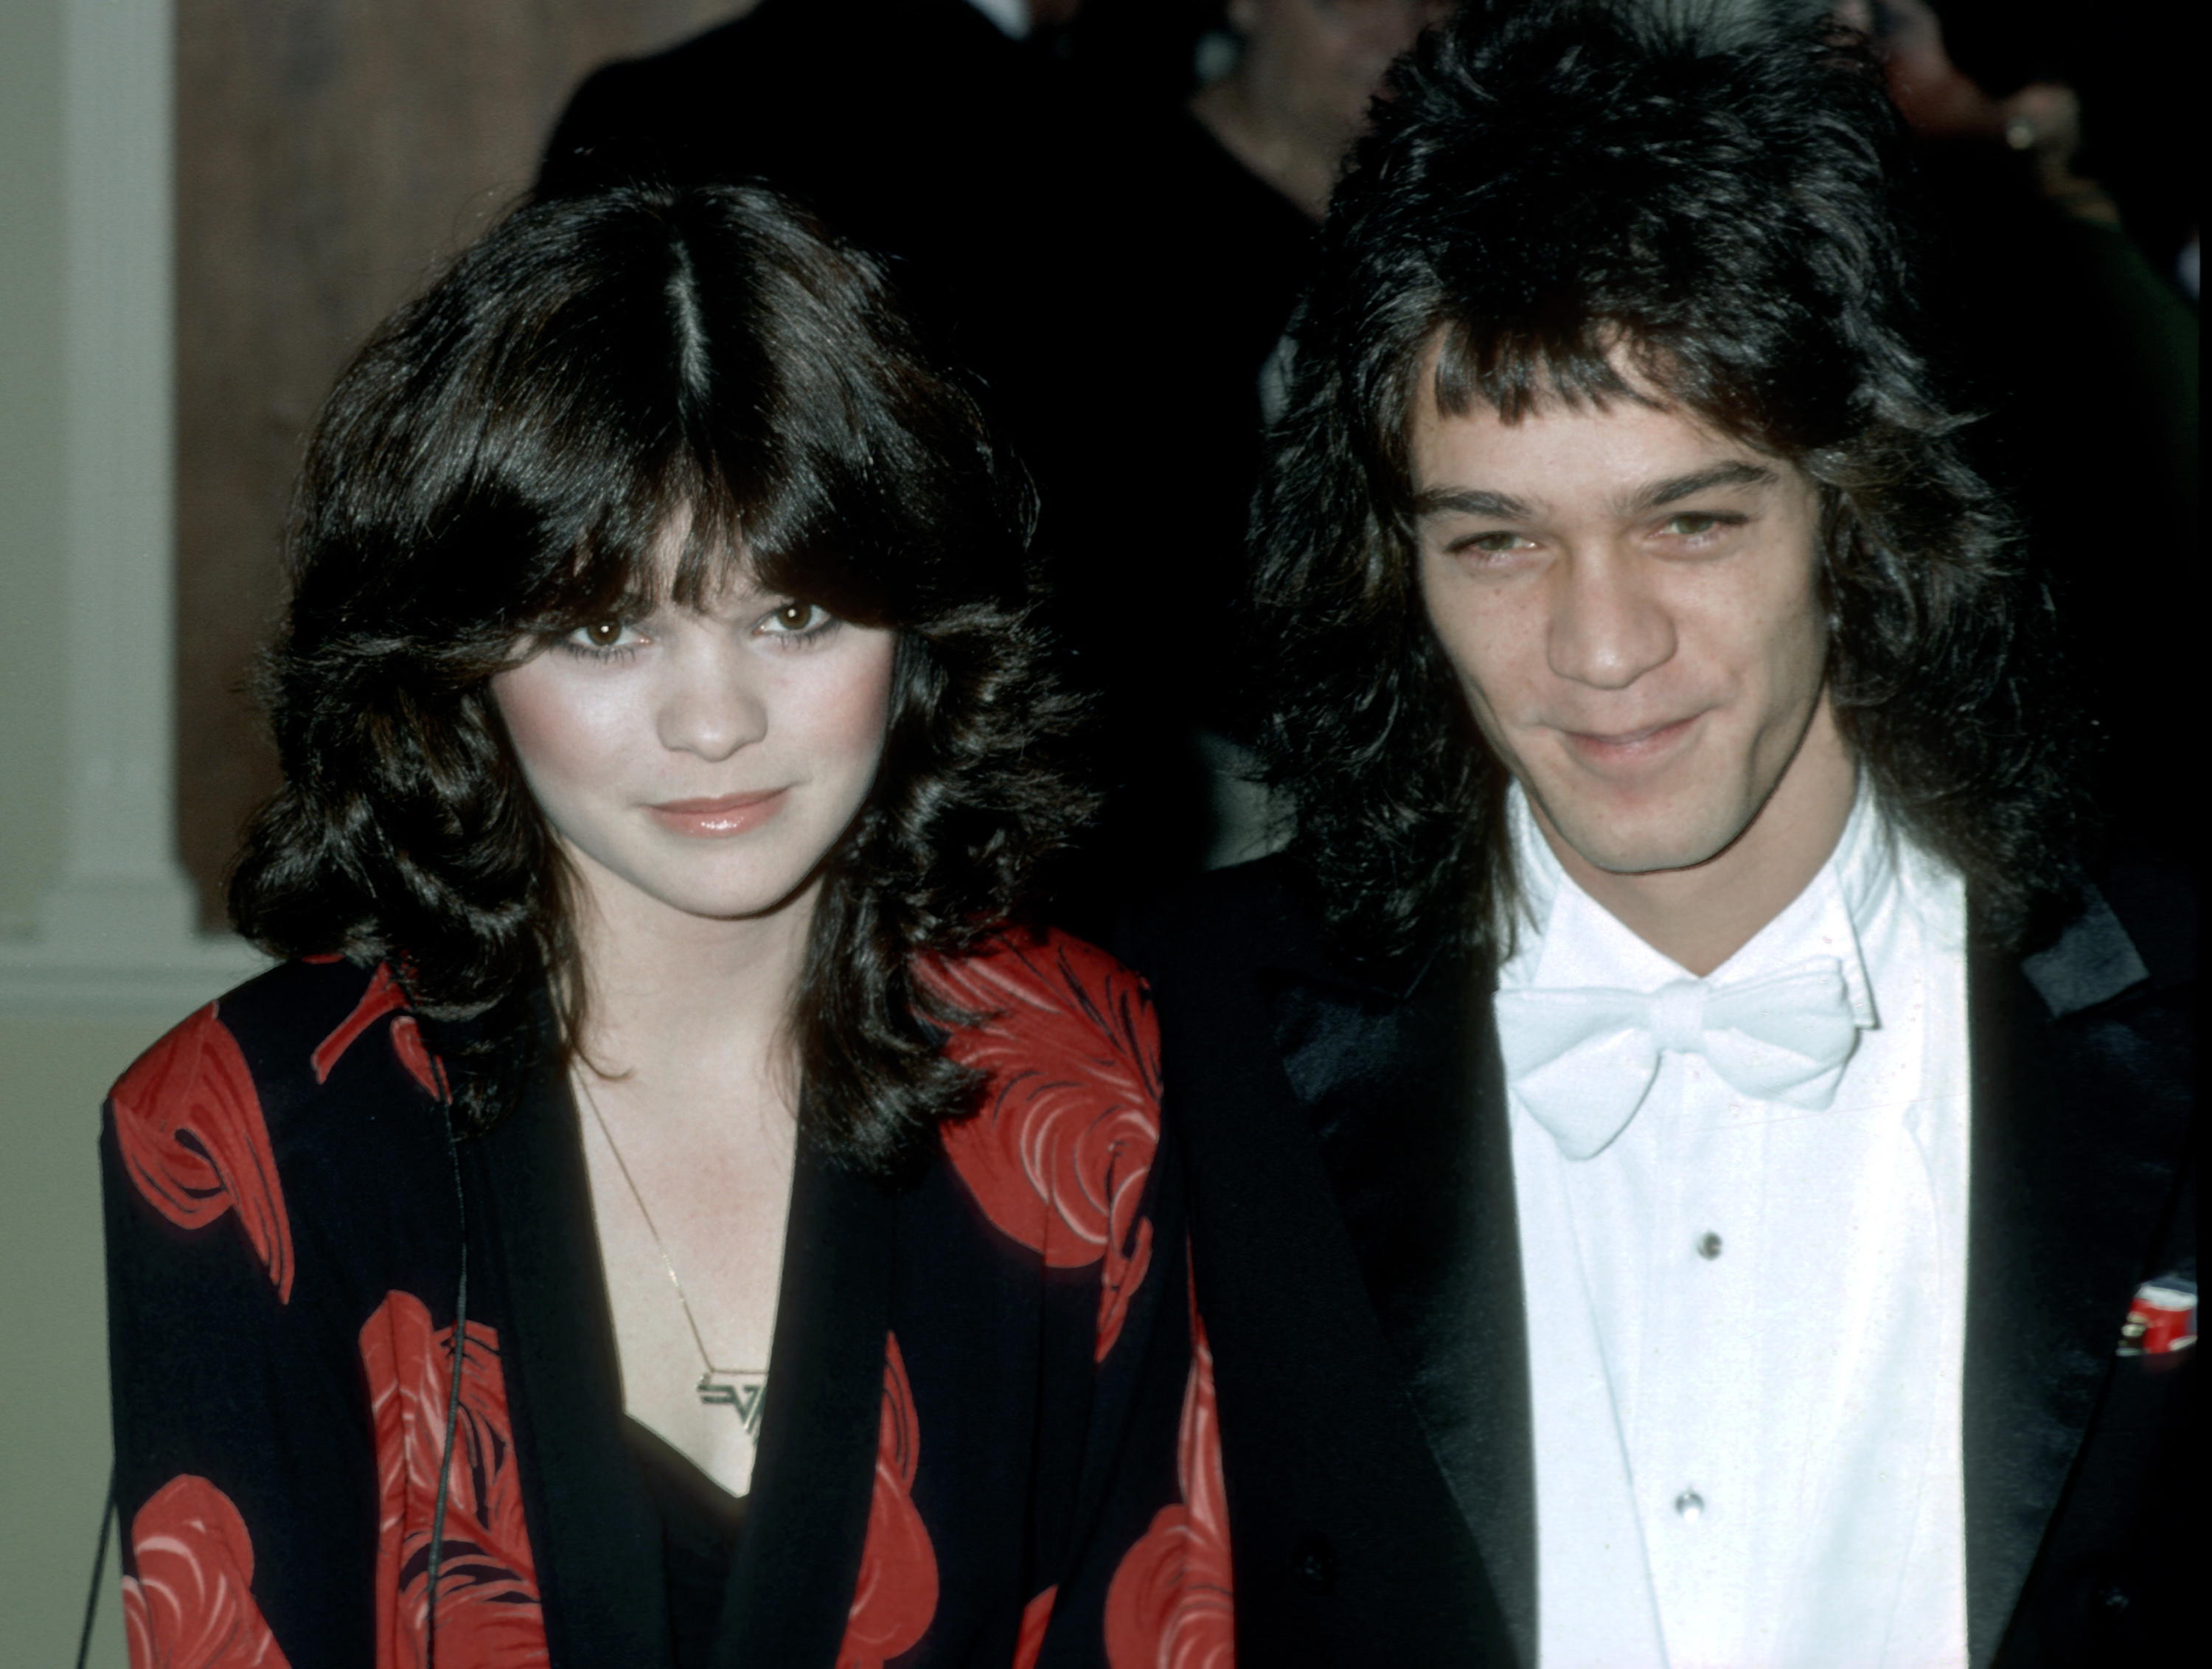 Valerie Bertinelli and Eddie Van Halen at the 38th Annual Golden Globe Awards in Beverly Hills, California in 1981. | Source: Getty Images